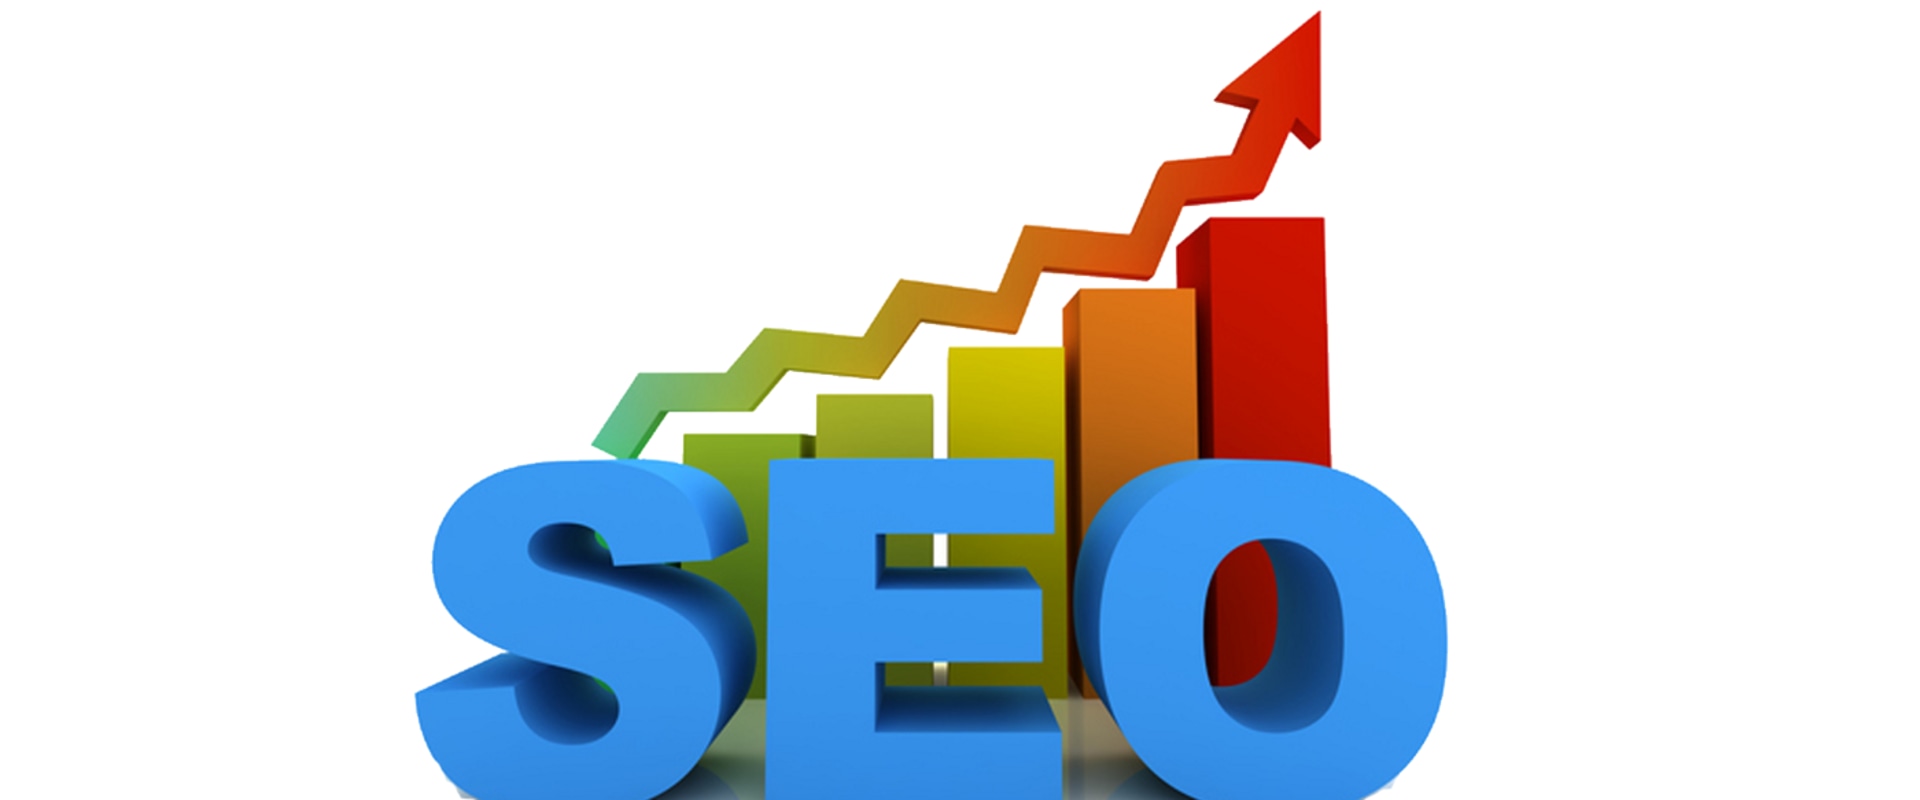 What is search engine optimization examples?